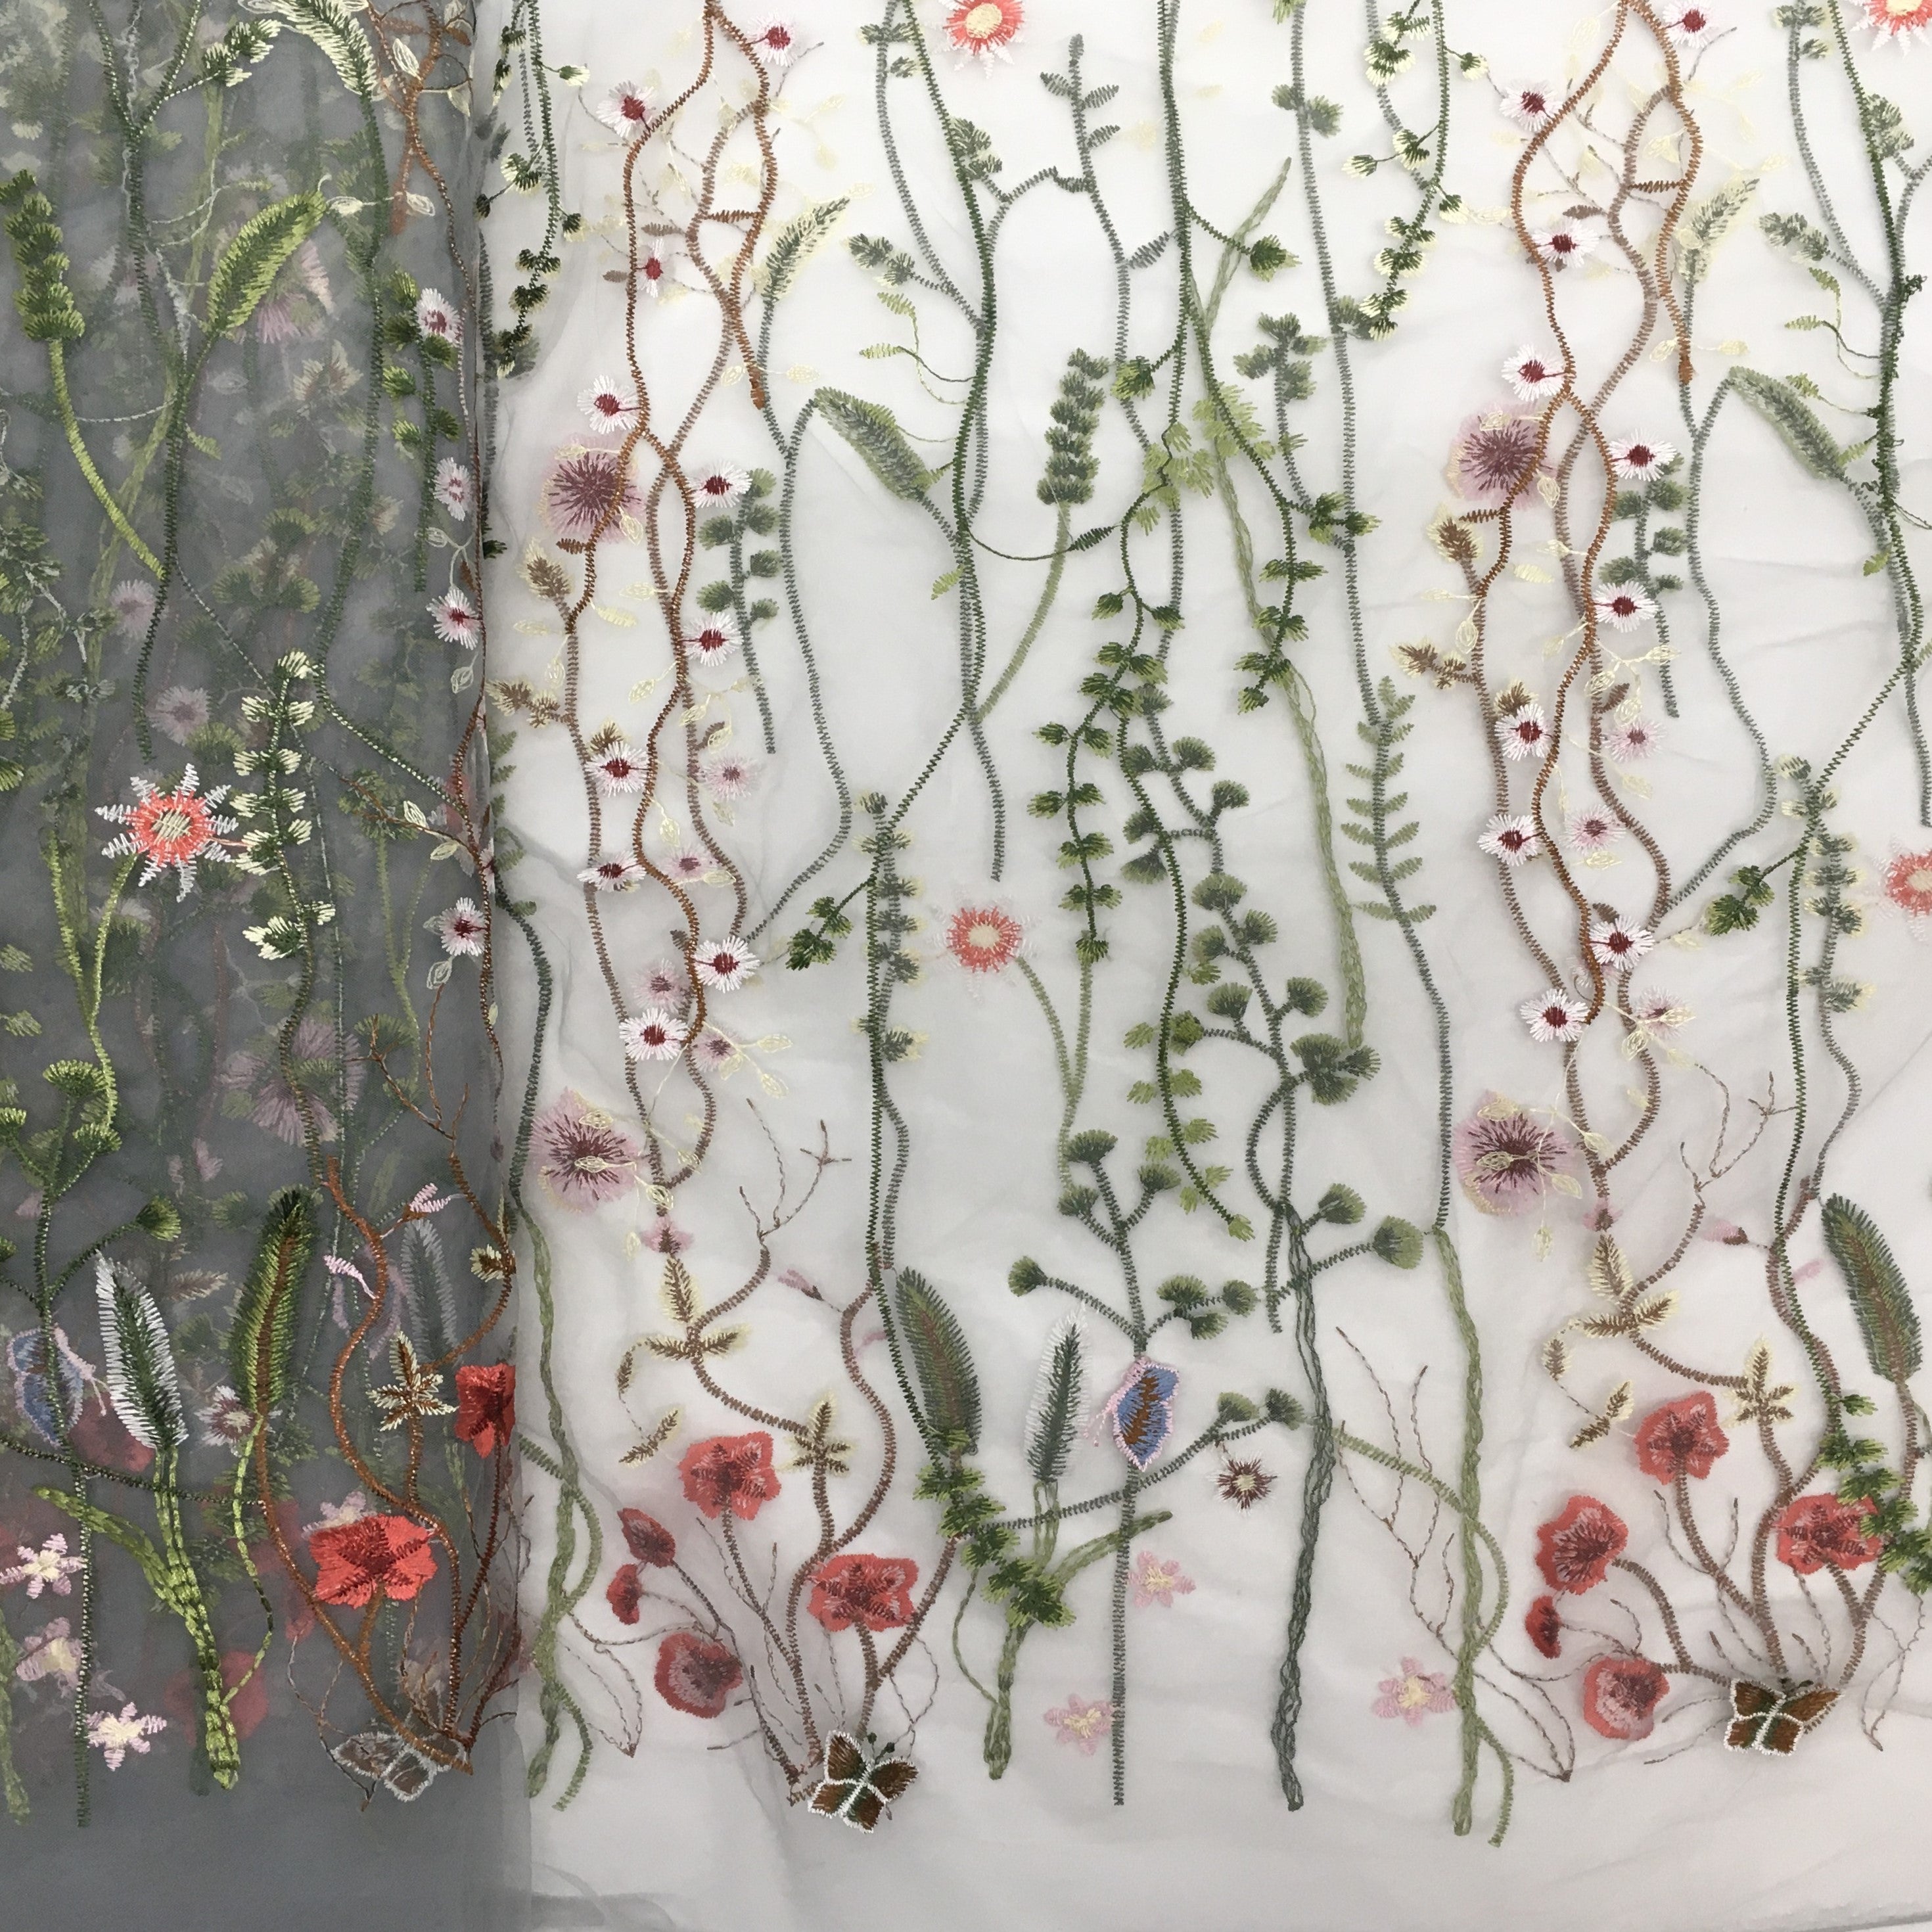 60 inch Floral Embroidered Overlay Tulle- Gray Tulle with Red Green Flowers